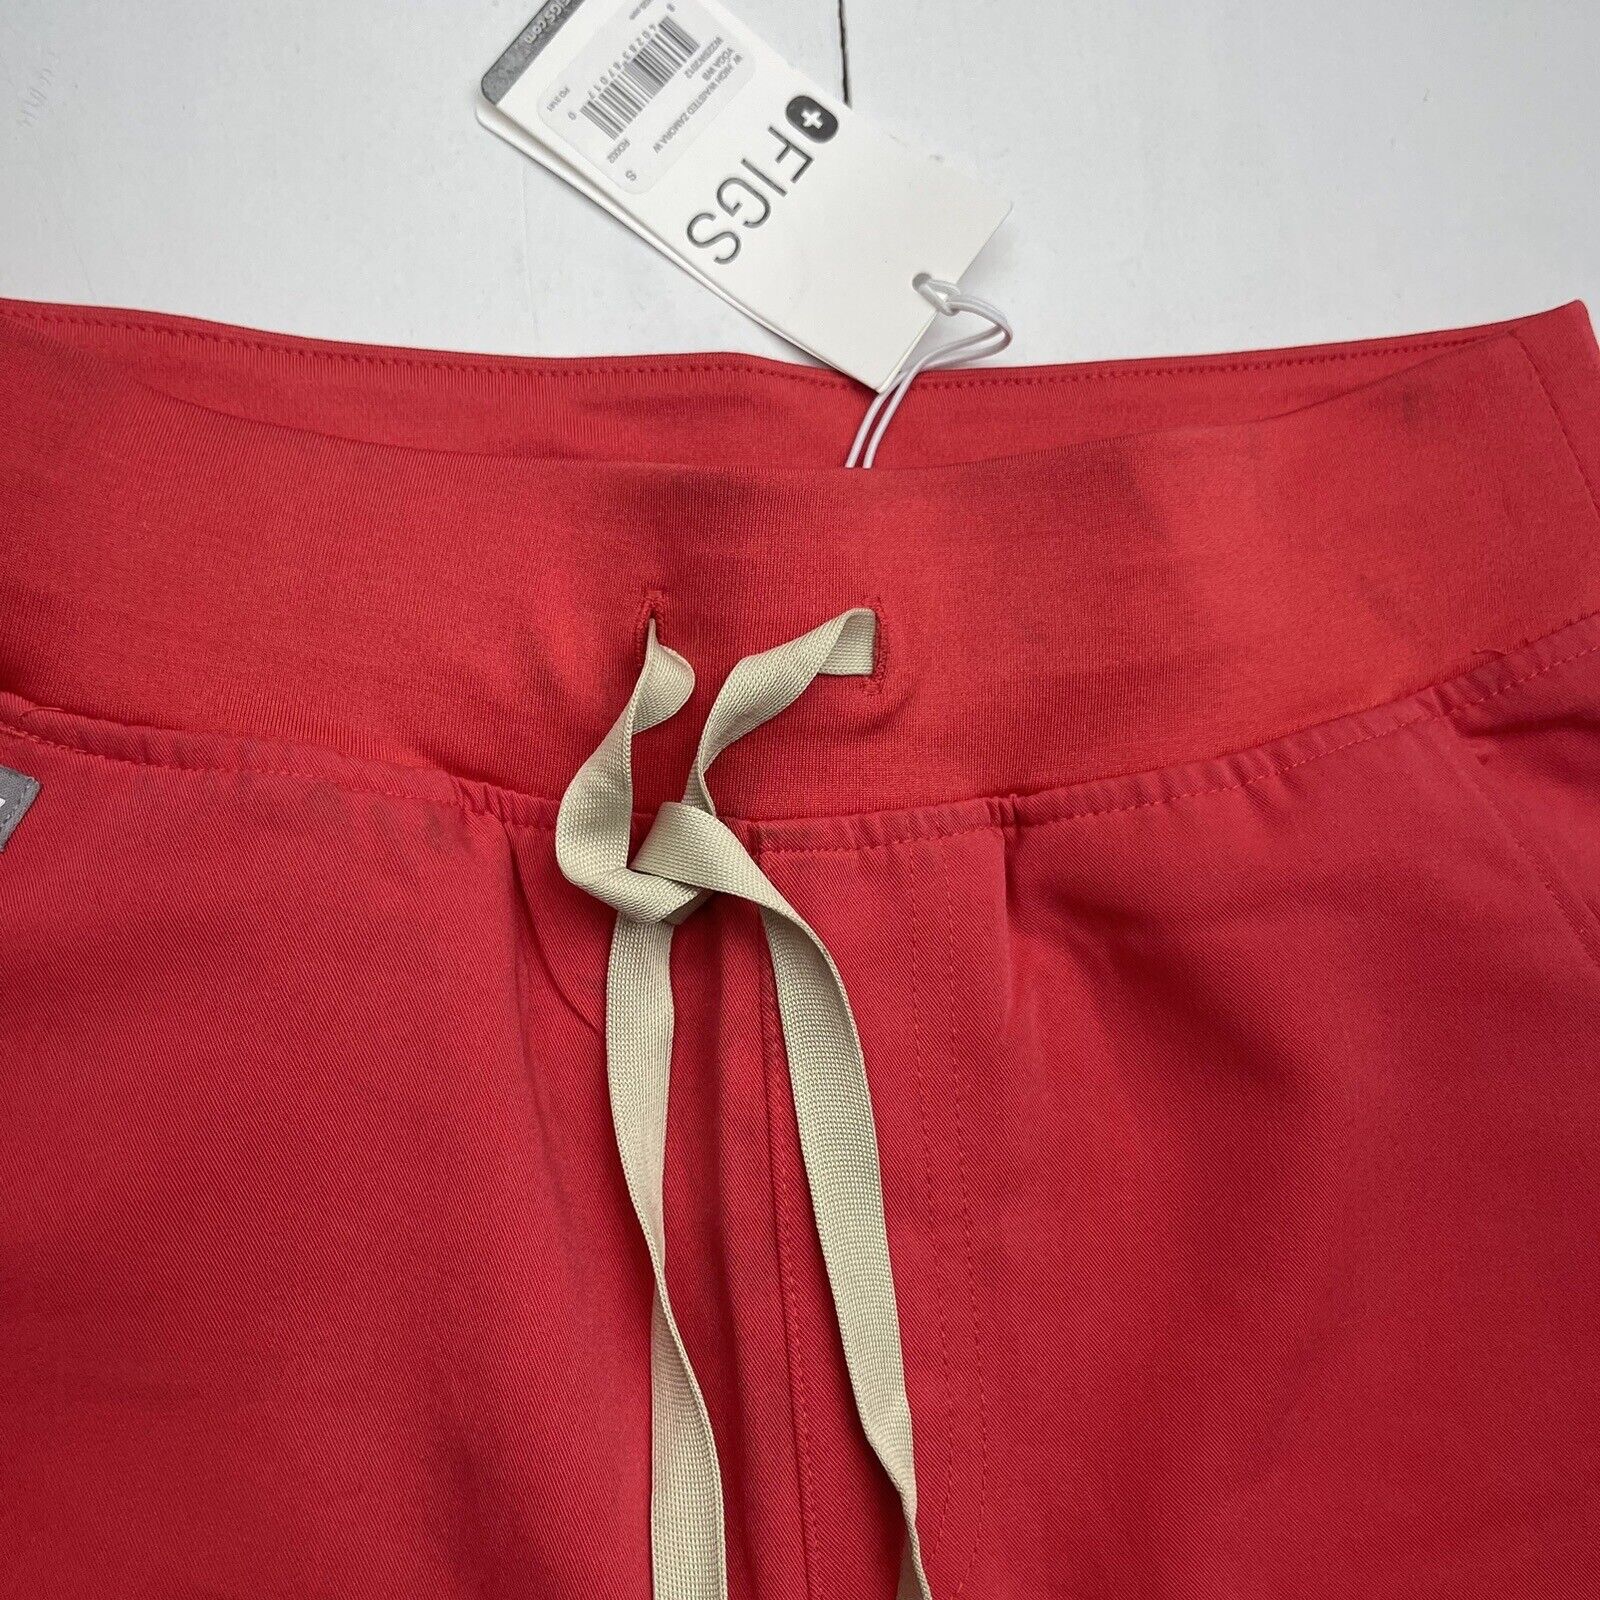 Figs High Waisted Zamora Jogger Scrubs Red Women's Small New Defect $4 -  beyond exchange